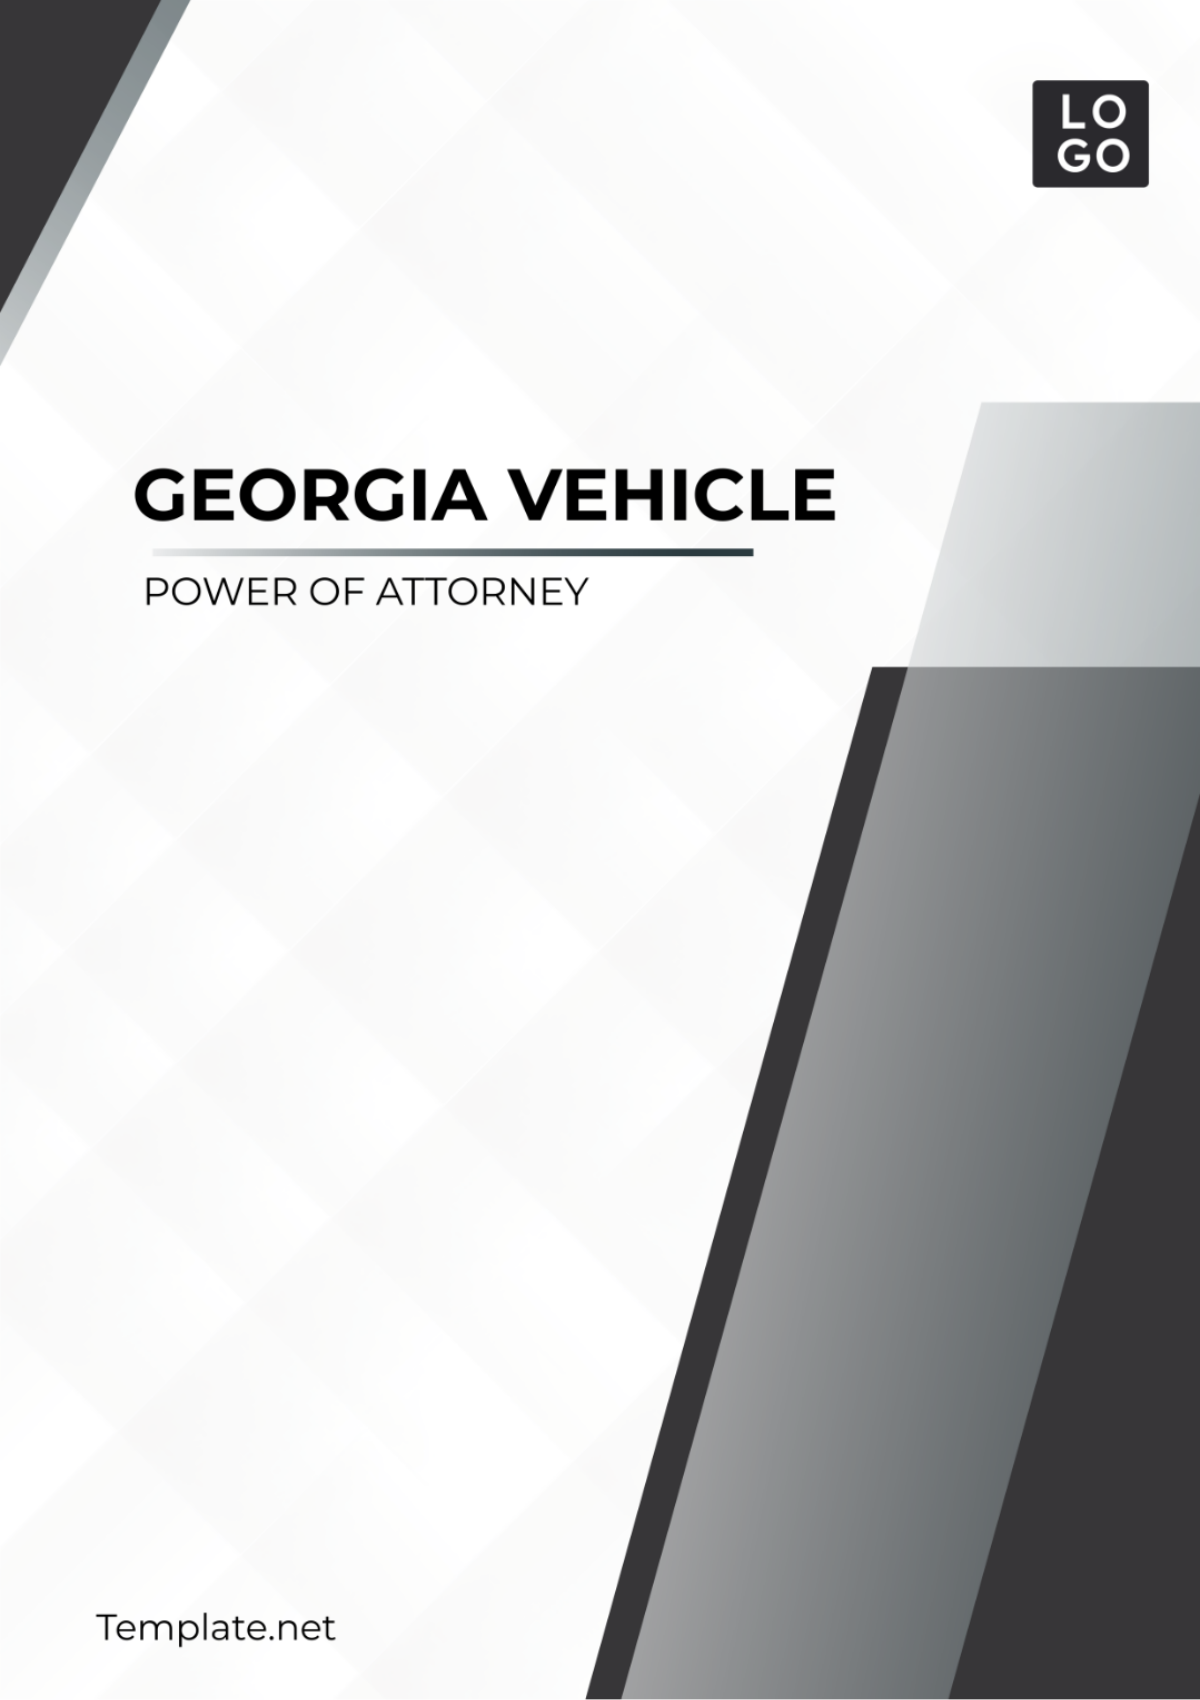 Georgia Vehicle Power of Attorney Template